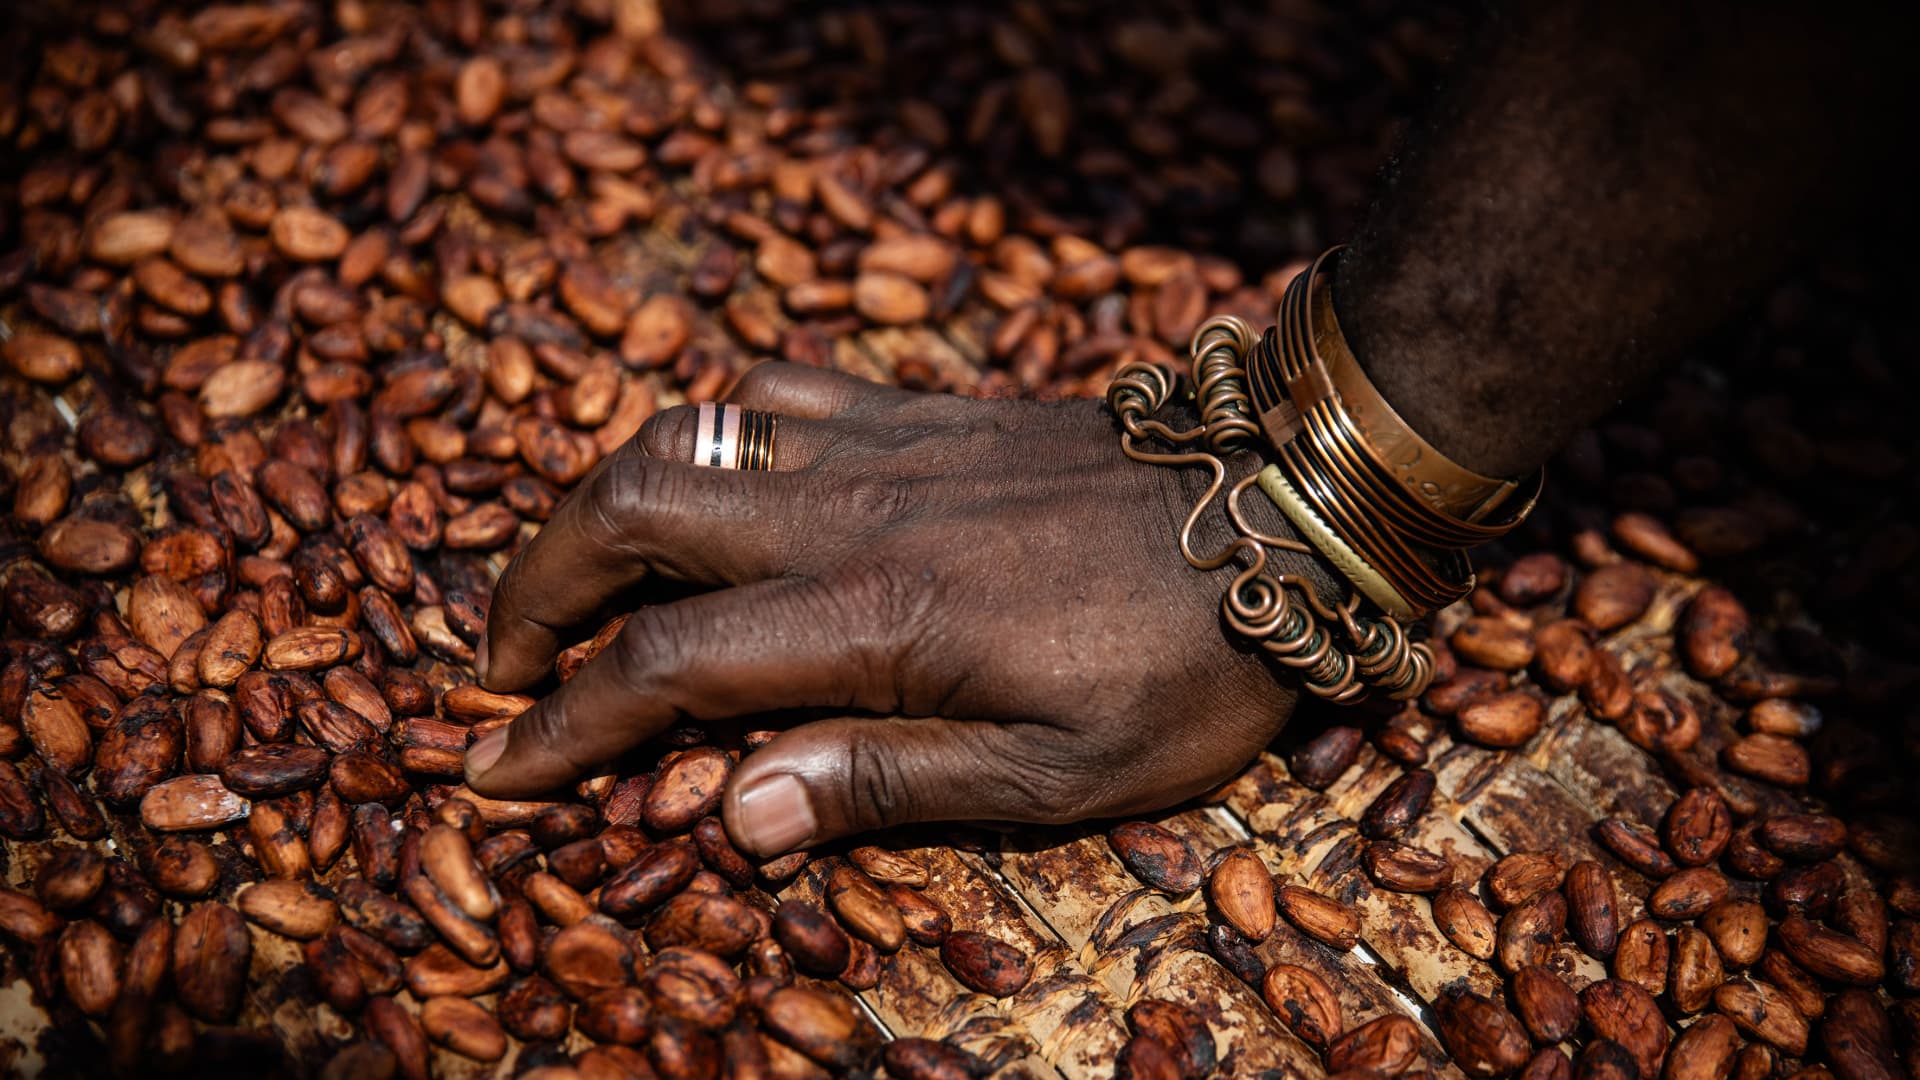 Cocoa prices surge to all-time highs as bad weather hurts West Africa crop yield